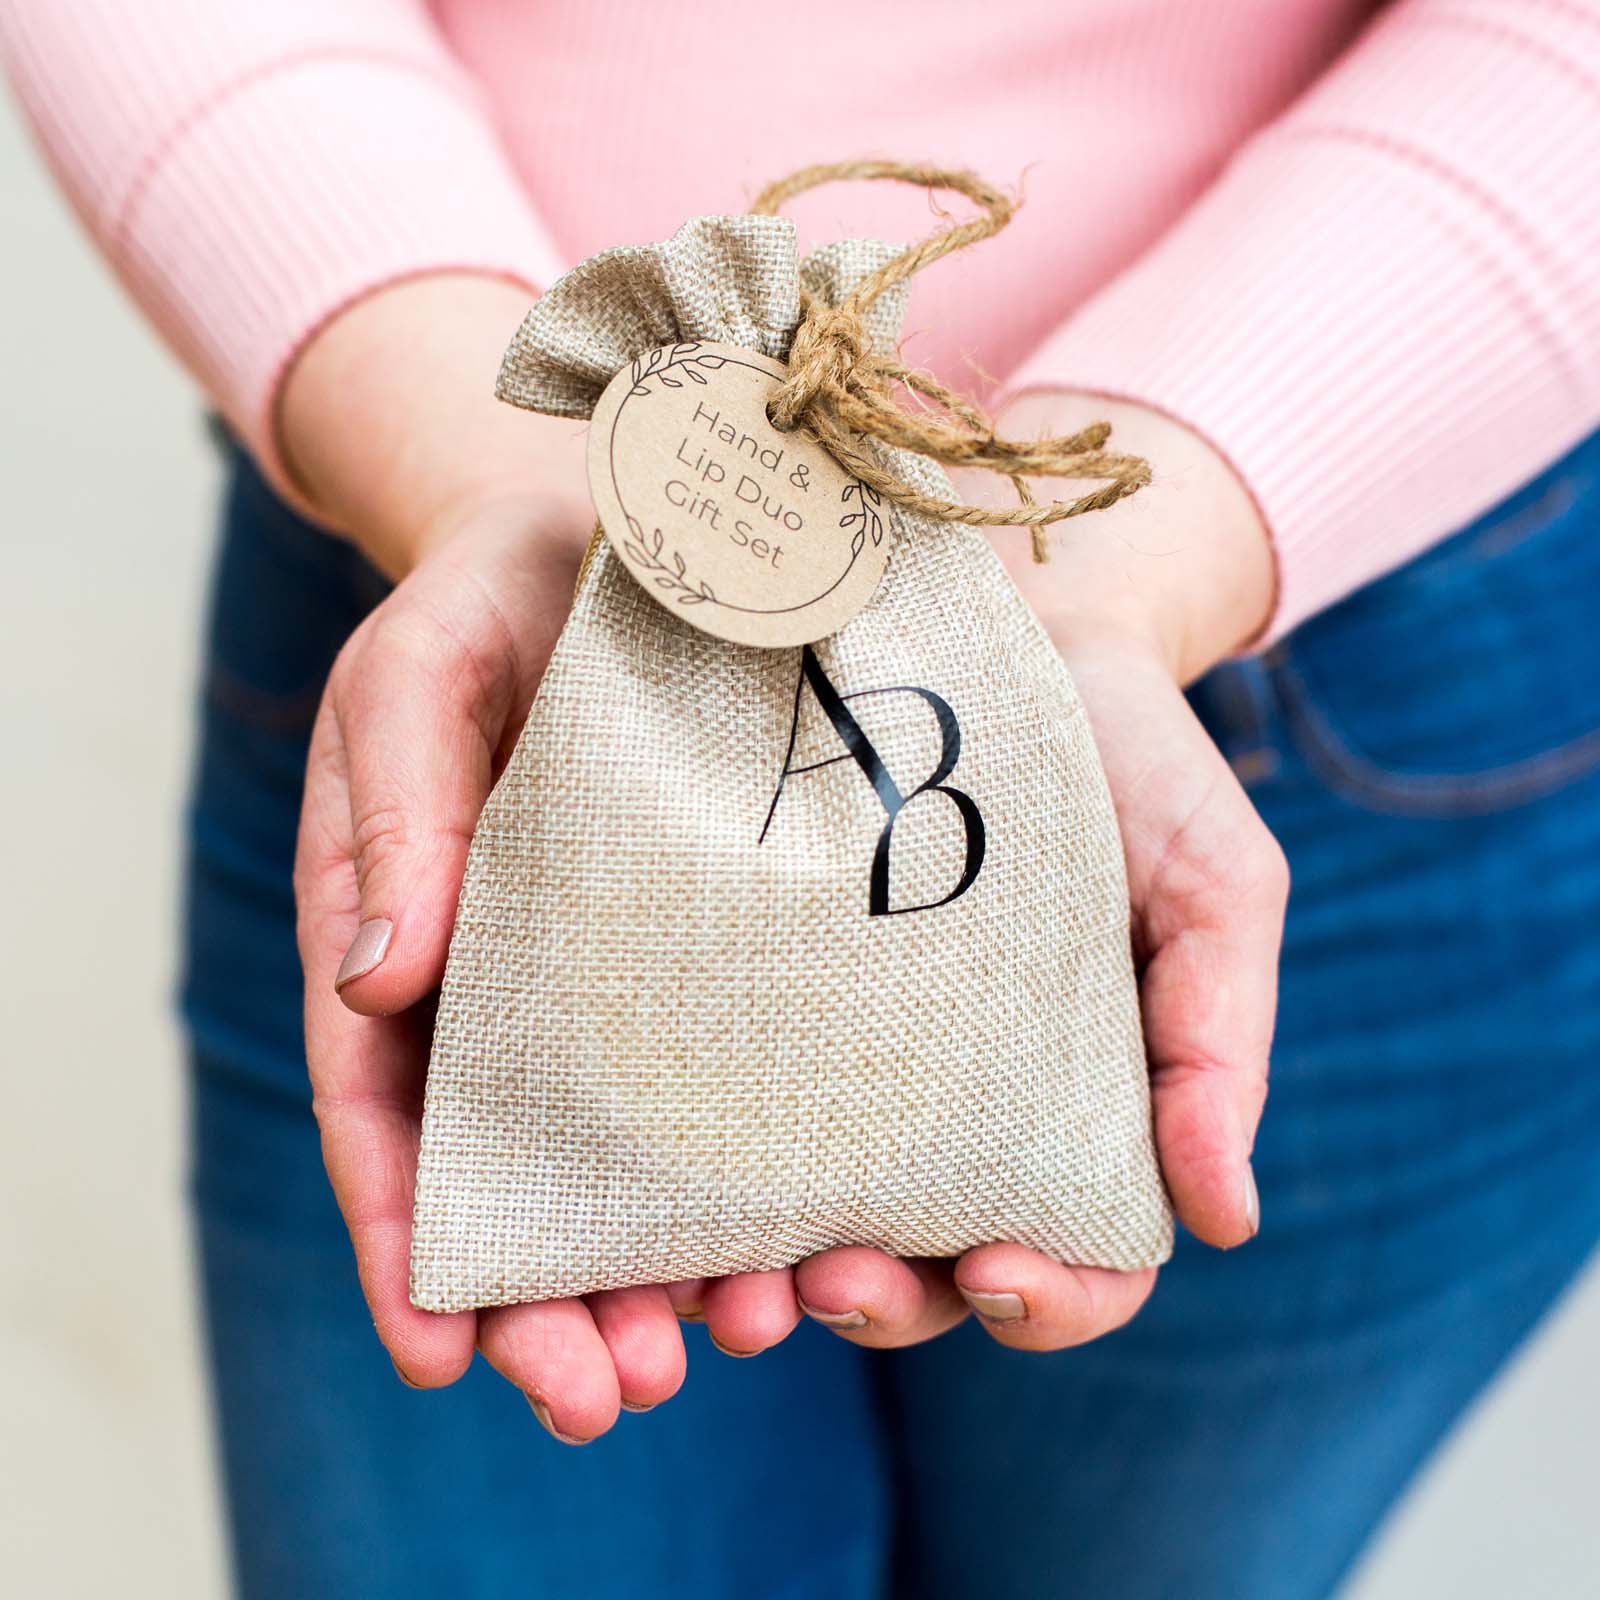 Branded Awesome botanical hessian bag with gift tag in hands